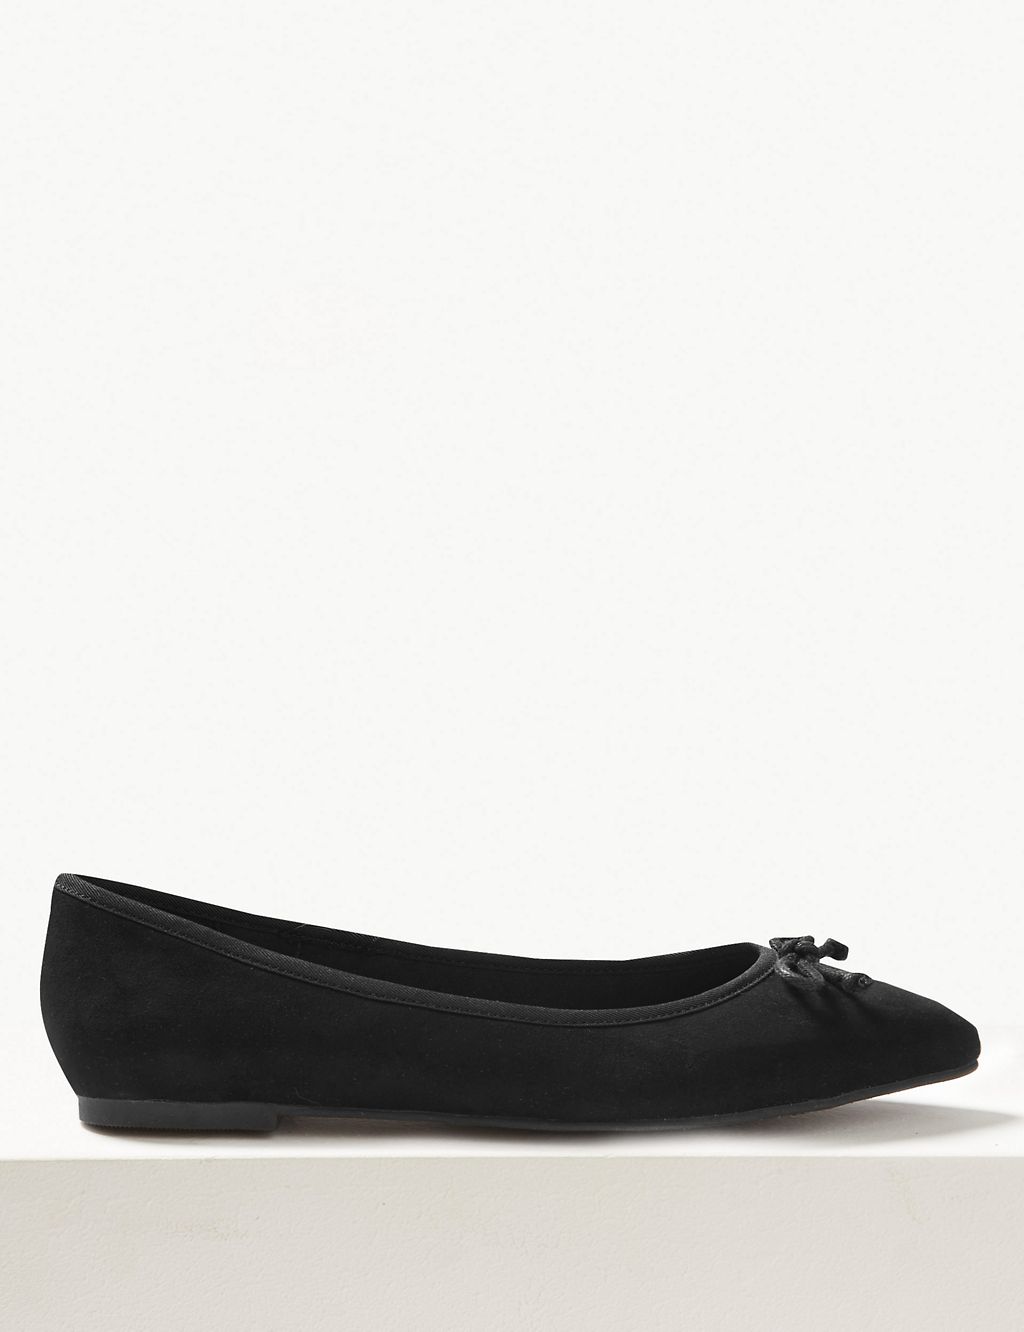 Pointed Toe Ballet Pumps 1 of 5